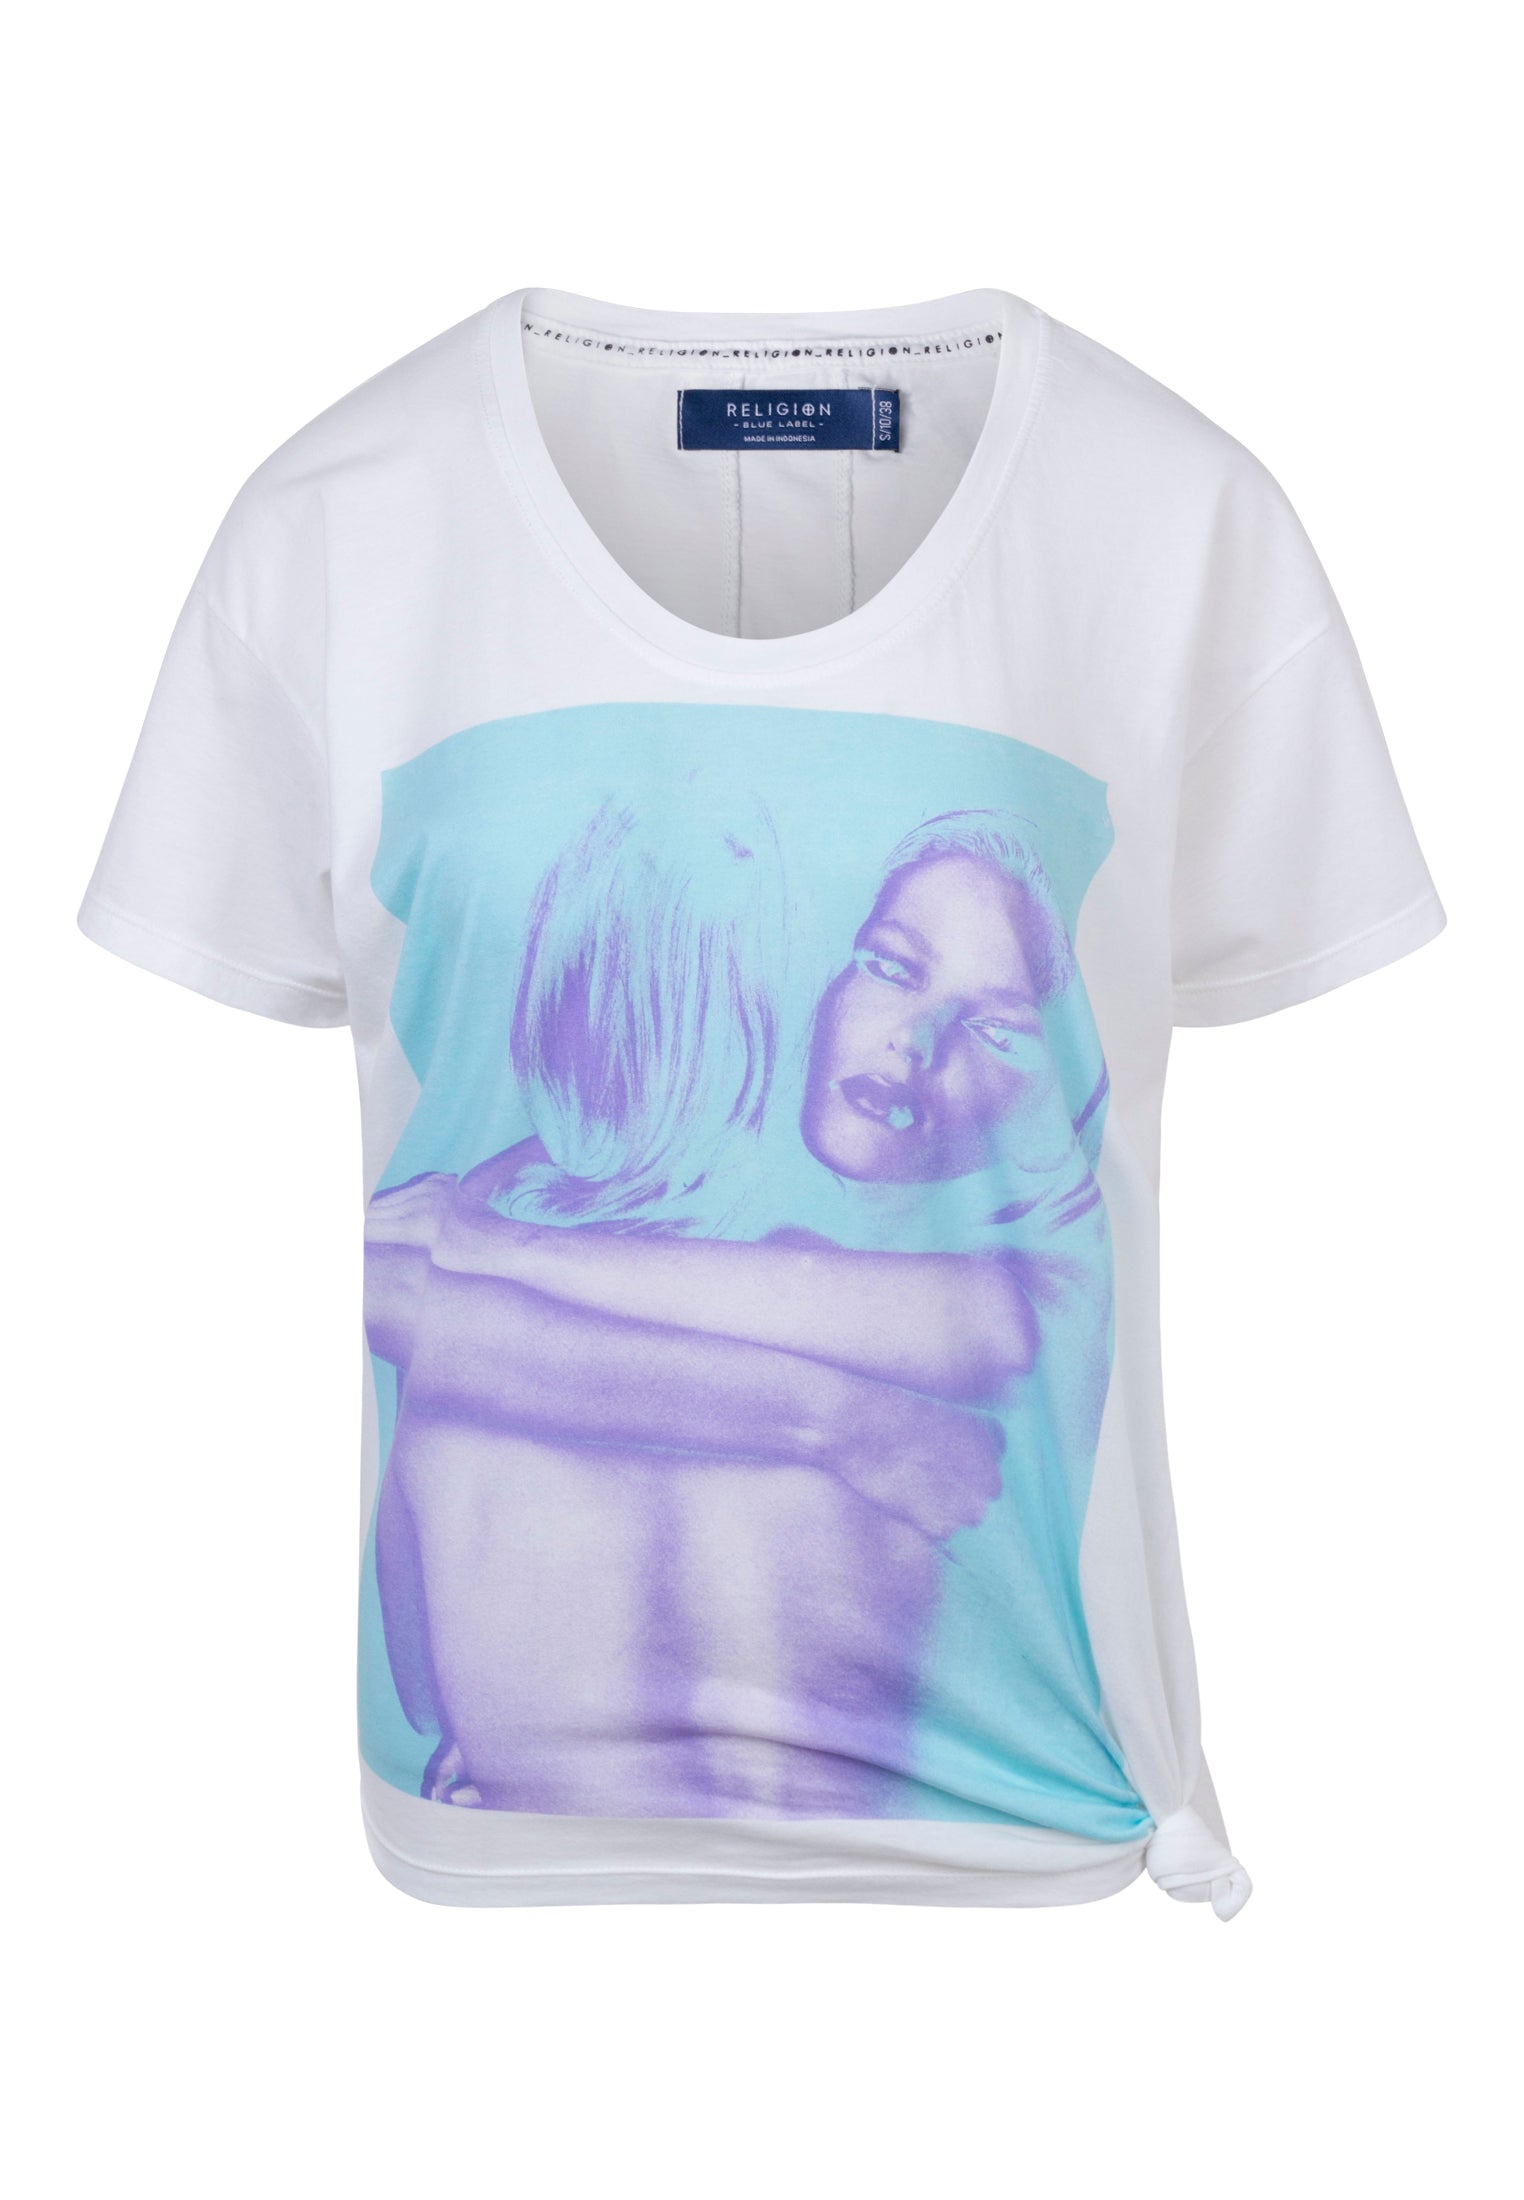 RELIGION Embracing Girl Graphic Print T-Shirt